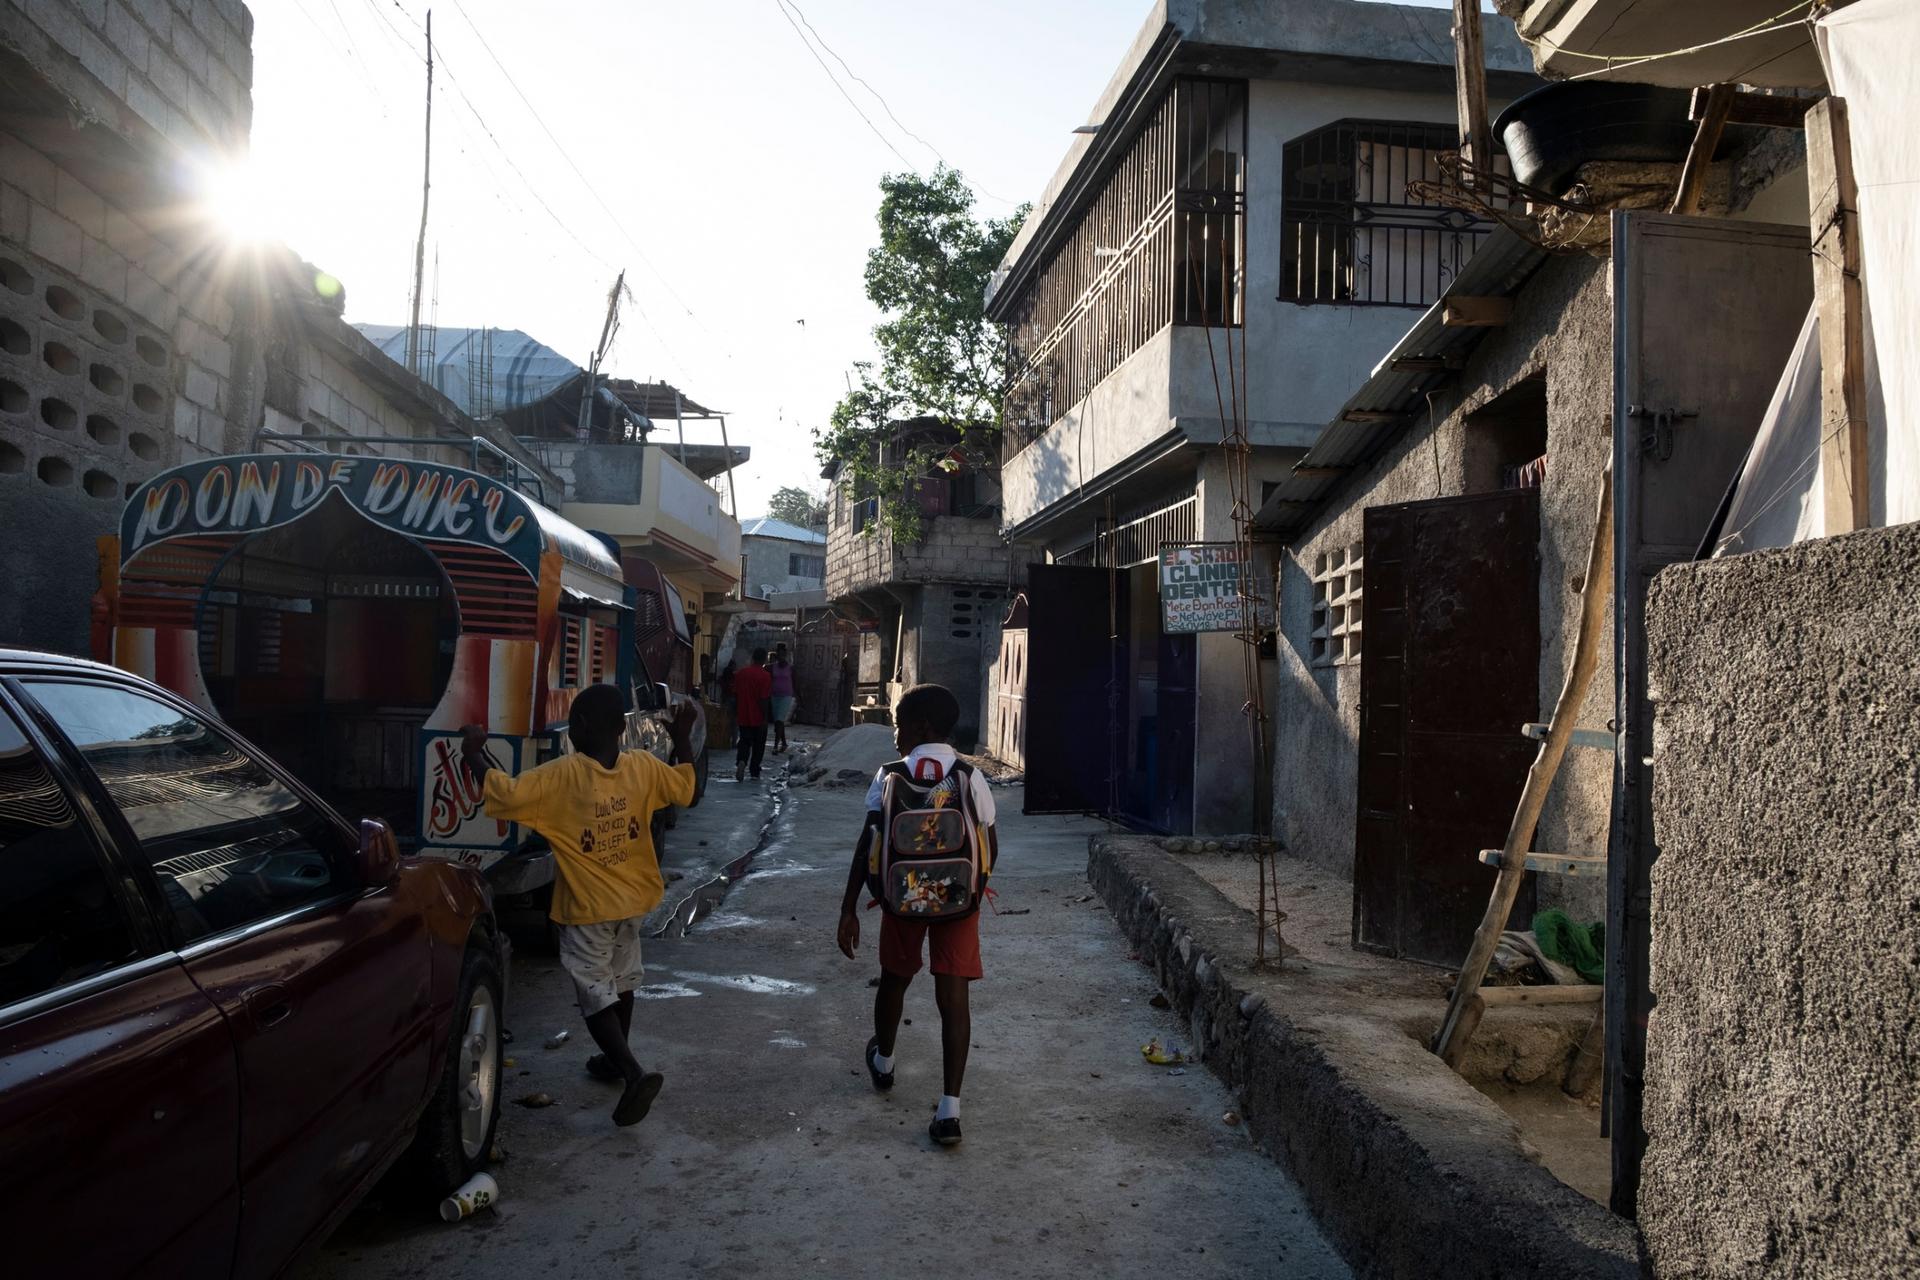 Two children, one with a backpack, are shown walking through a neighborhood in Laboule, outside of Port-au-Prince, Haiti.